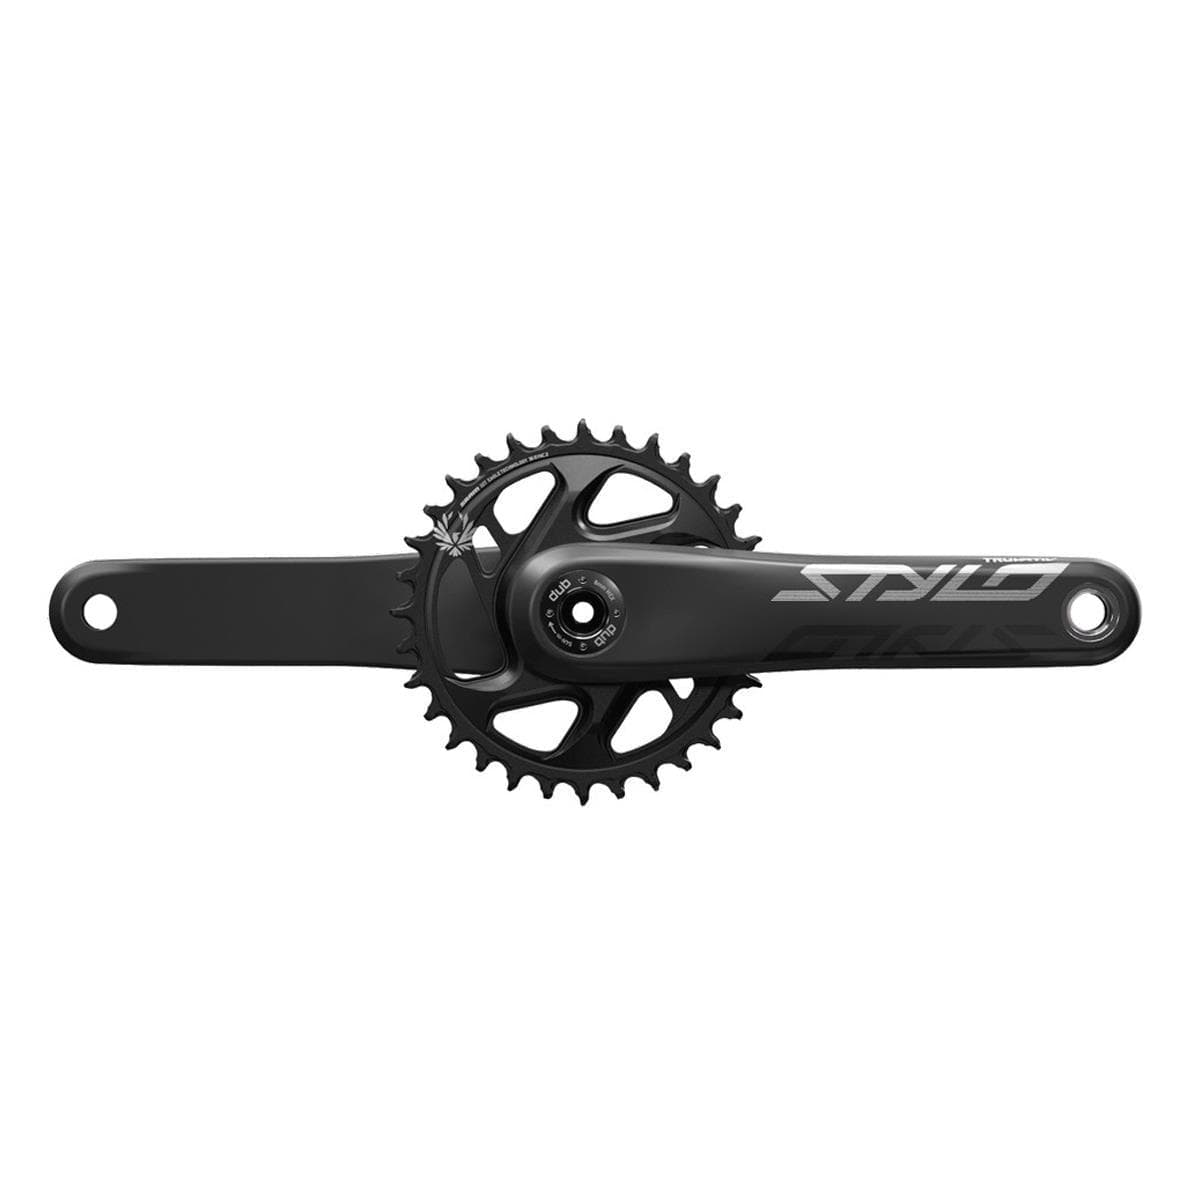 Truvativ Crank Stylo Carbon Eagle Fat Bike 4" Dub 12S 170 Wdirect Mount 30T X-Sync 2 Chainring Black (Dub Cups/Bearingsnot Included): Black 170Mm